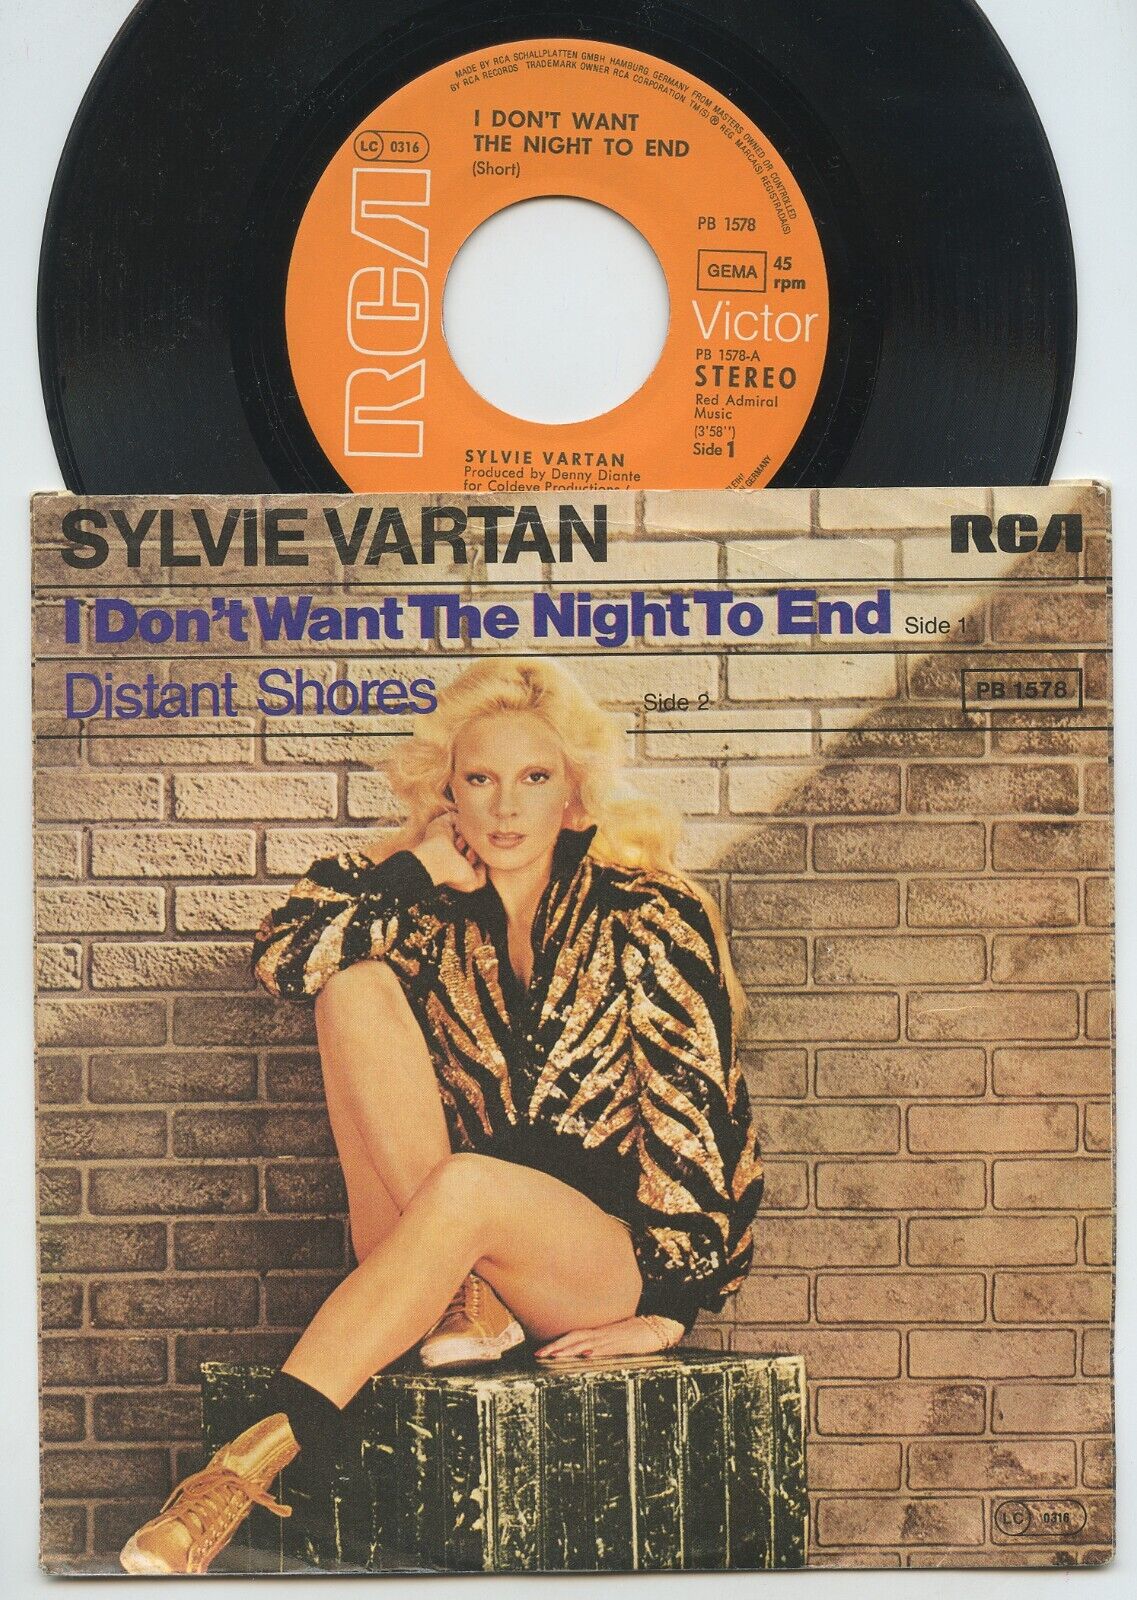 Rare Disco 45 & Picture Sleeve - Sylvie Vartan - I Don't Want The Night To End